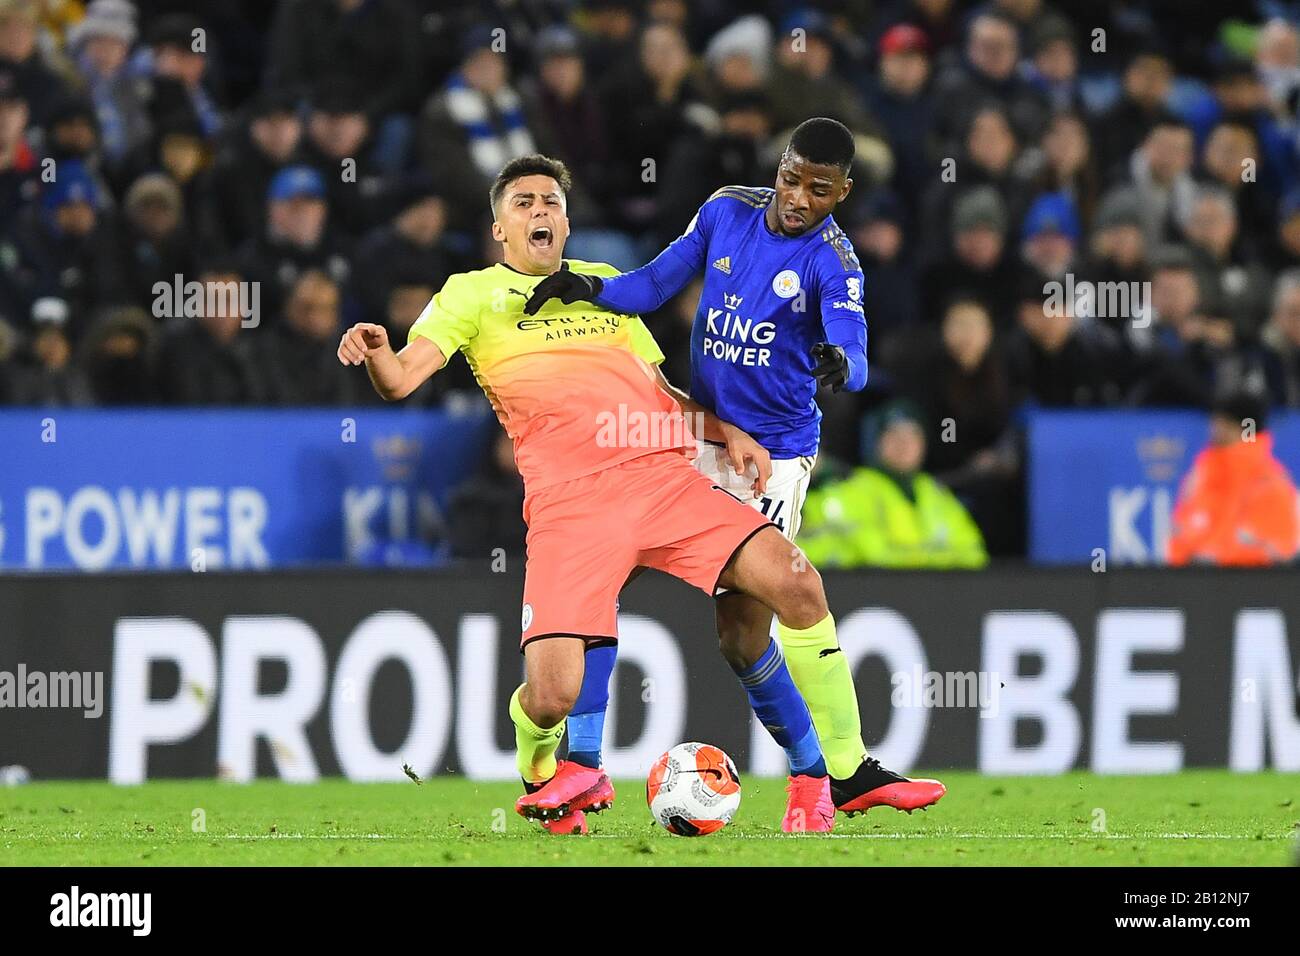 Leicester, UK. 22nd Feb, 2020. Kelechi Iheanacho (14) of Leicester City fouls Rodrigo (16) of Manchester City during the Premier League match between Leicester City and Manchester City at the King Power Stadium, Leicester on Saturday 22nd February 2020. (Credit: Jon Hobley | MI News) Photograph may only be used for newspaper and/or magazine editorial purposes, license required for commercial use Credit: MI News & Sport /Alamy Live News Credit: MI News & Sport /Alamy Live News Stock Photo